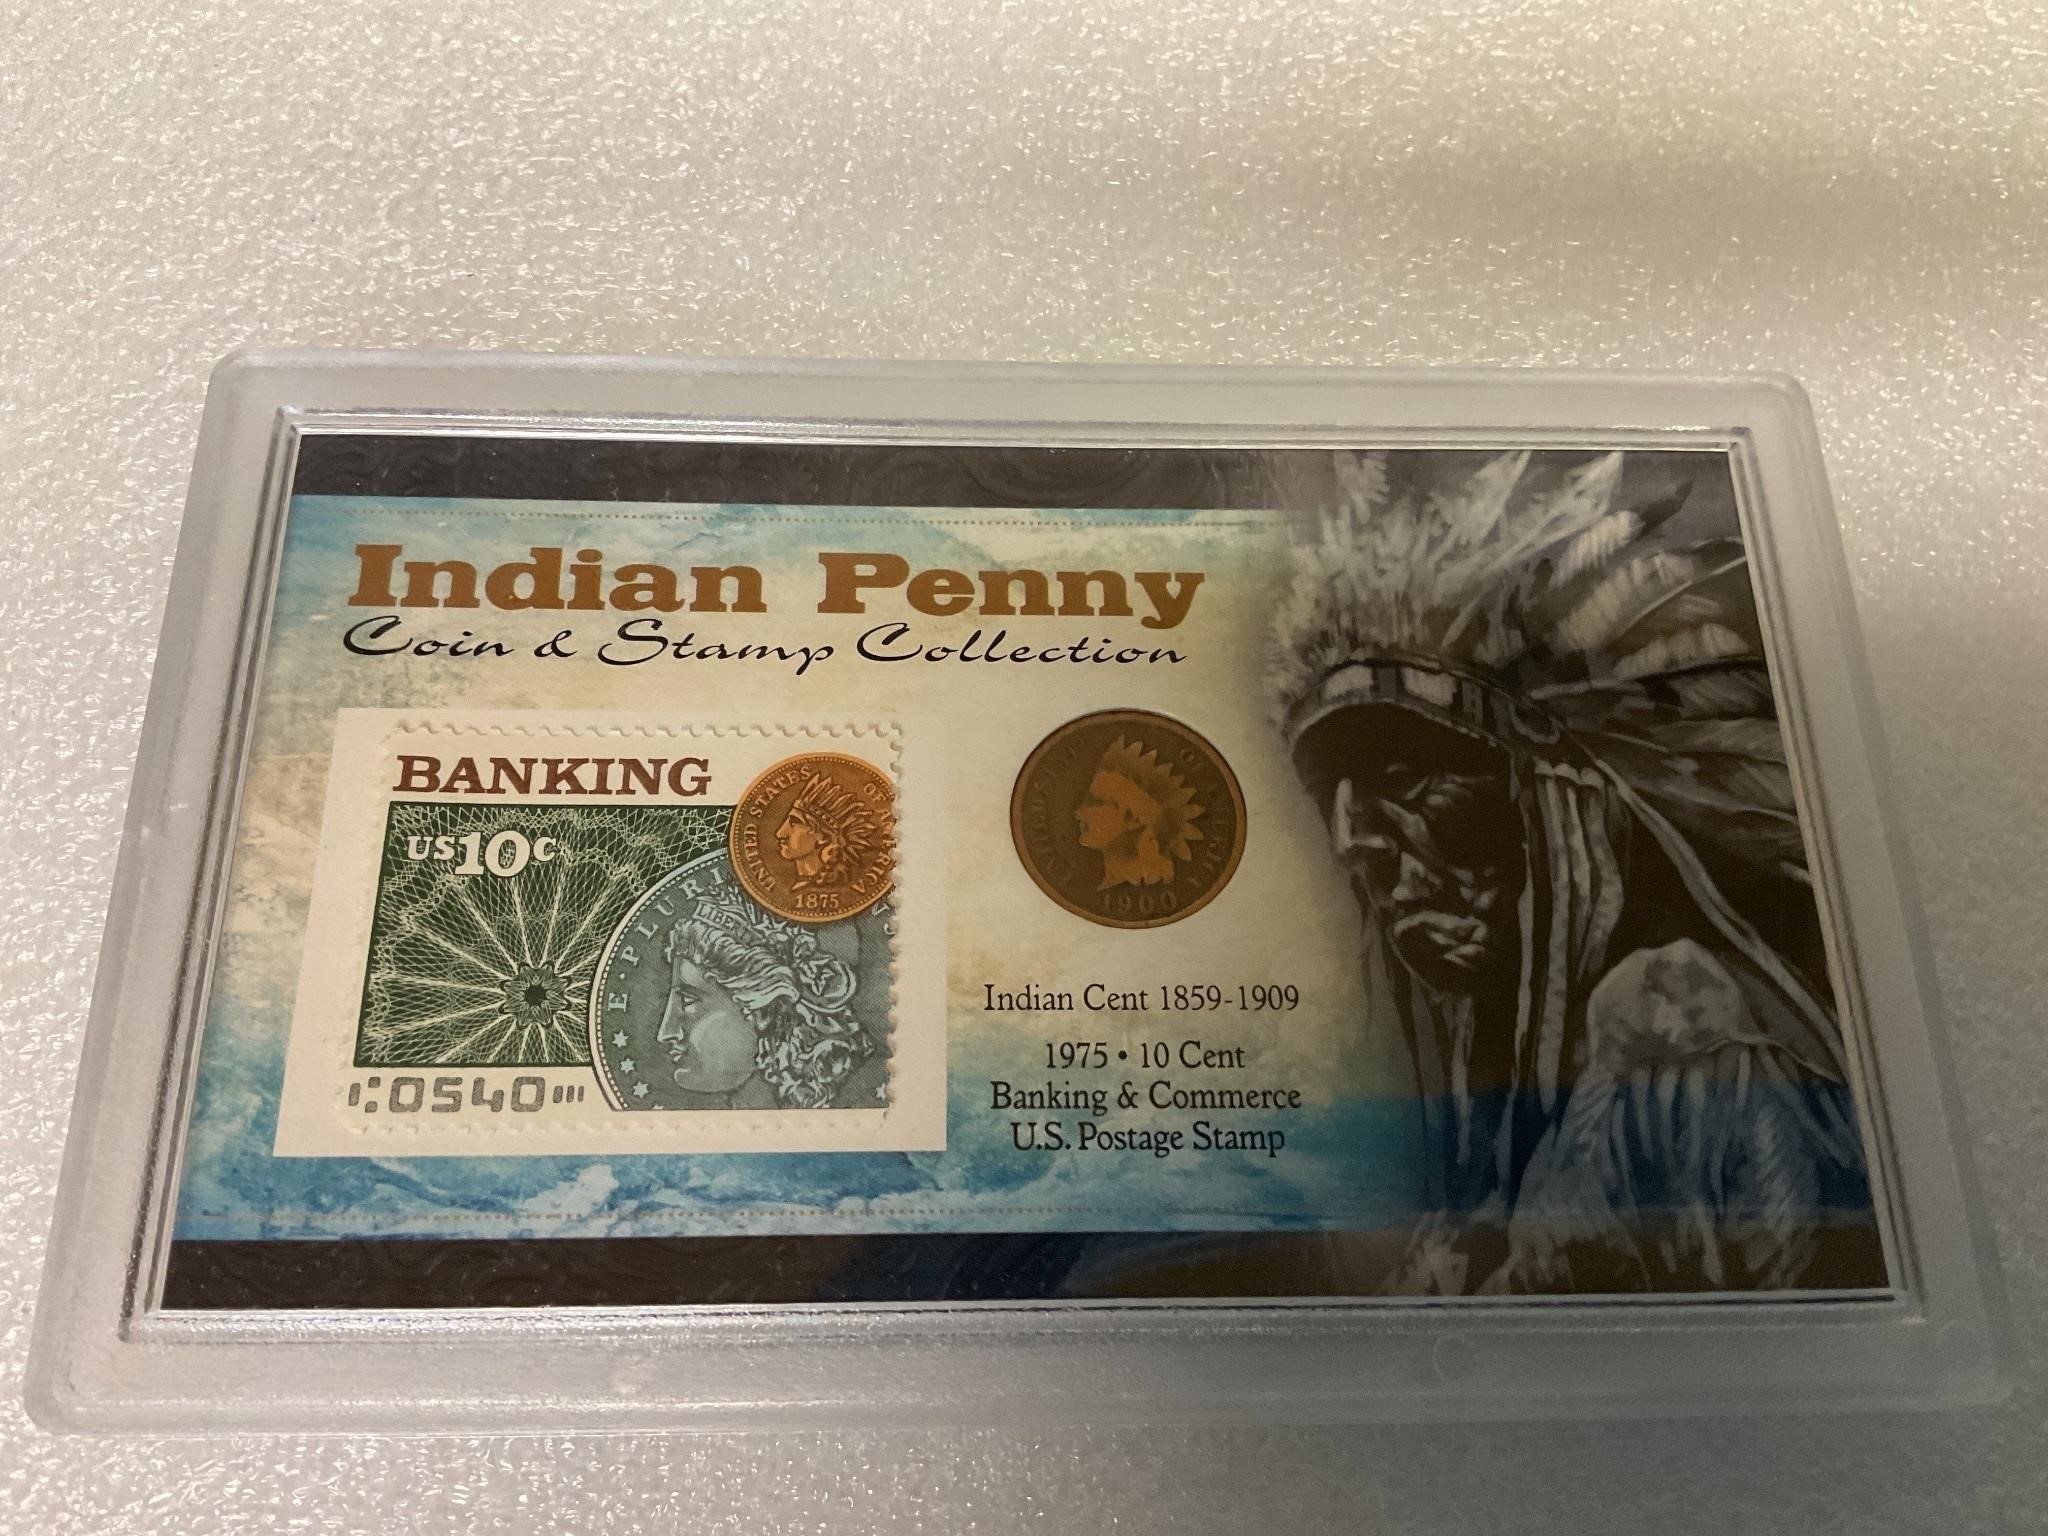 Indian penny & stamp